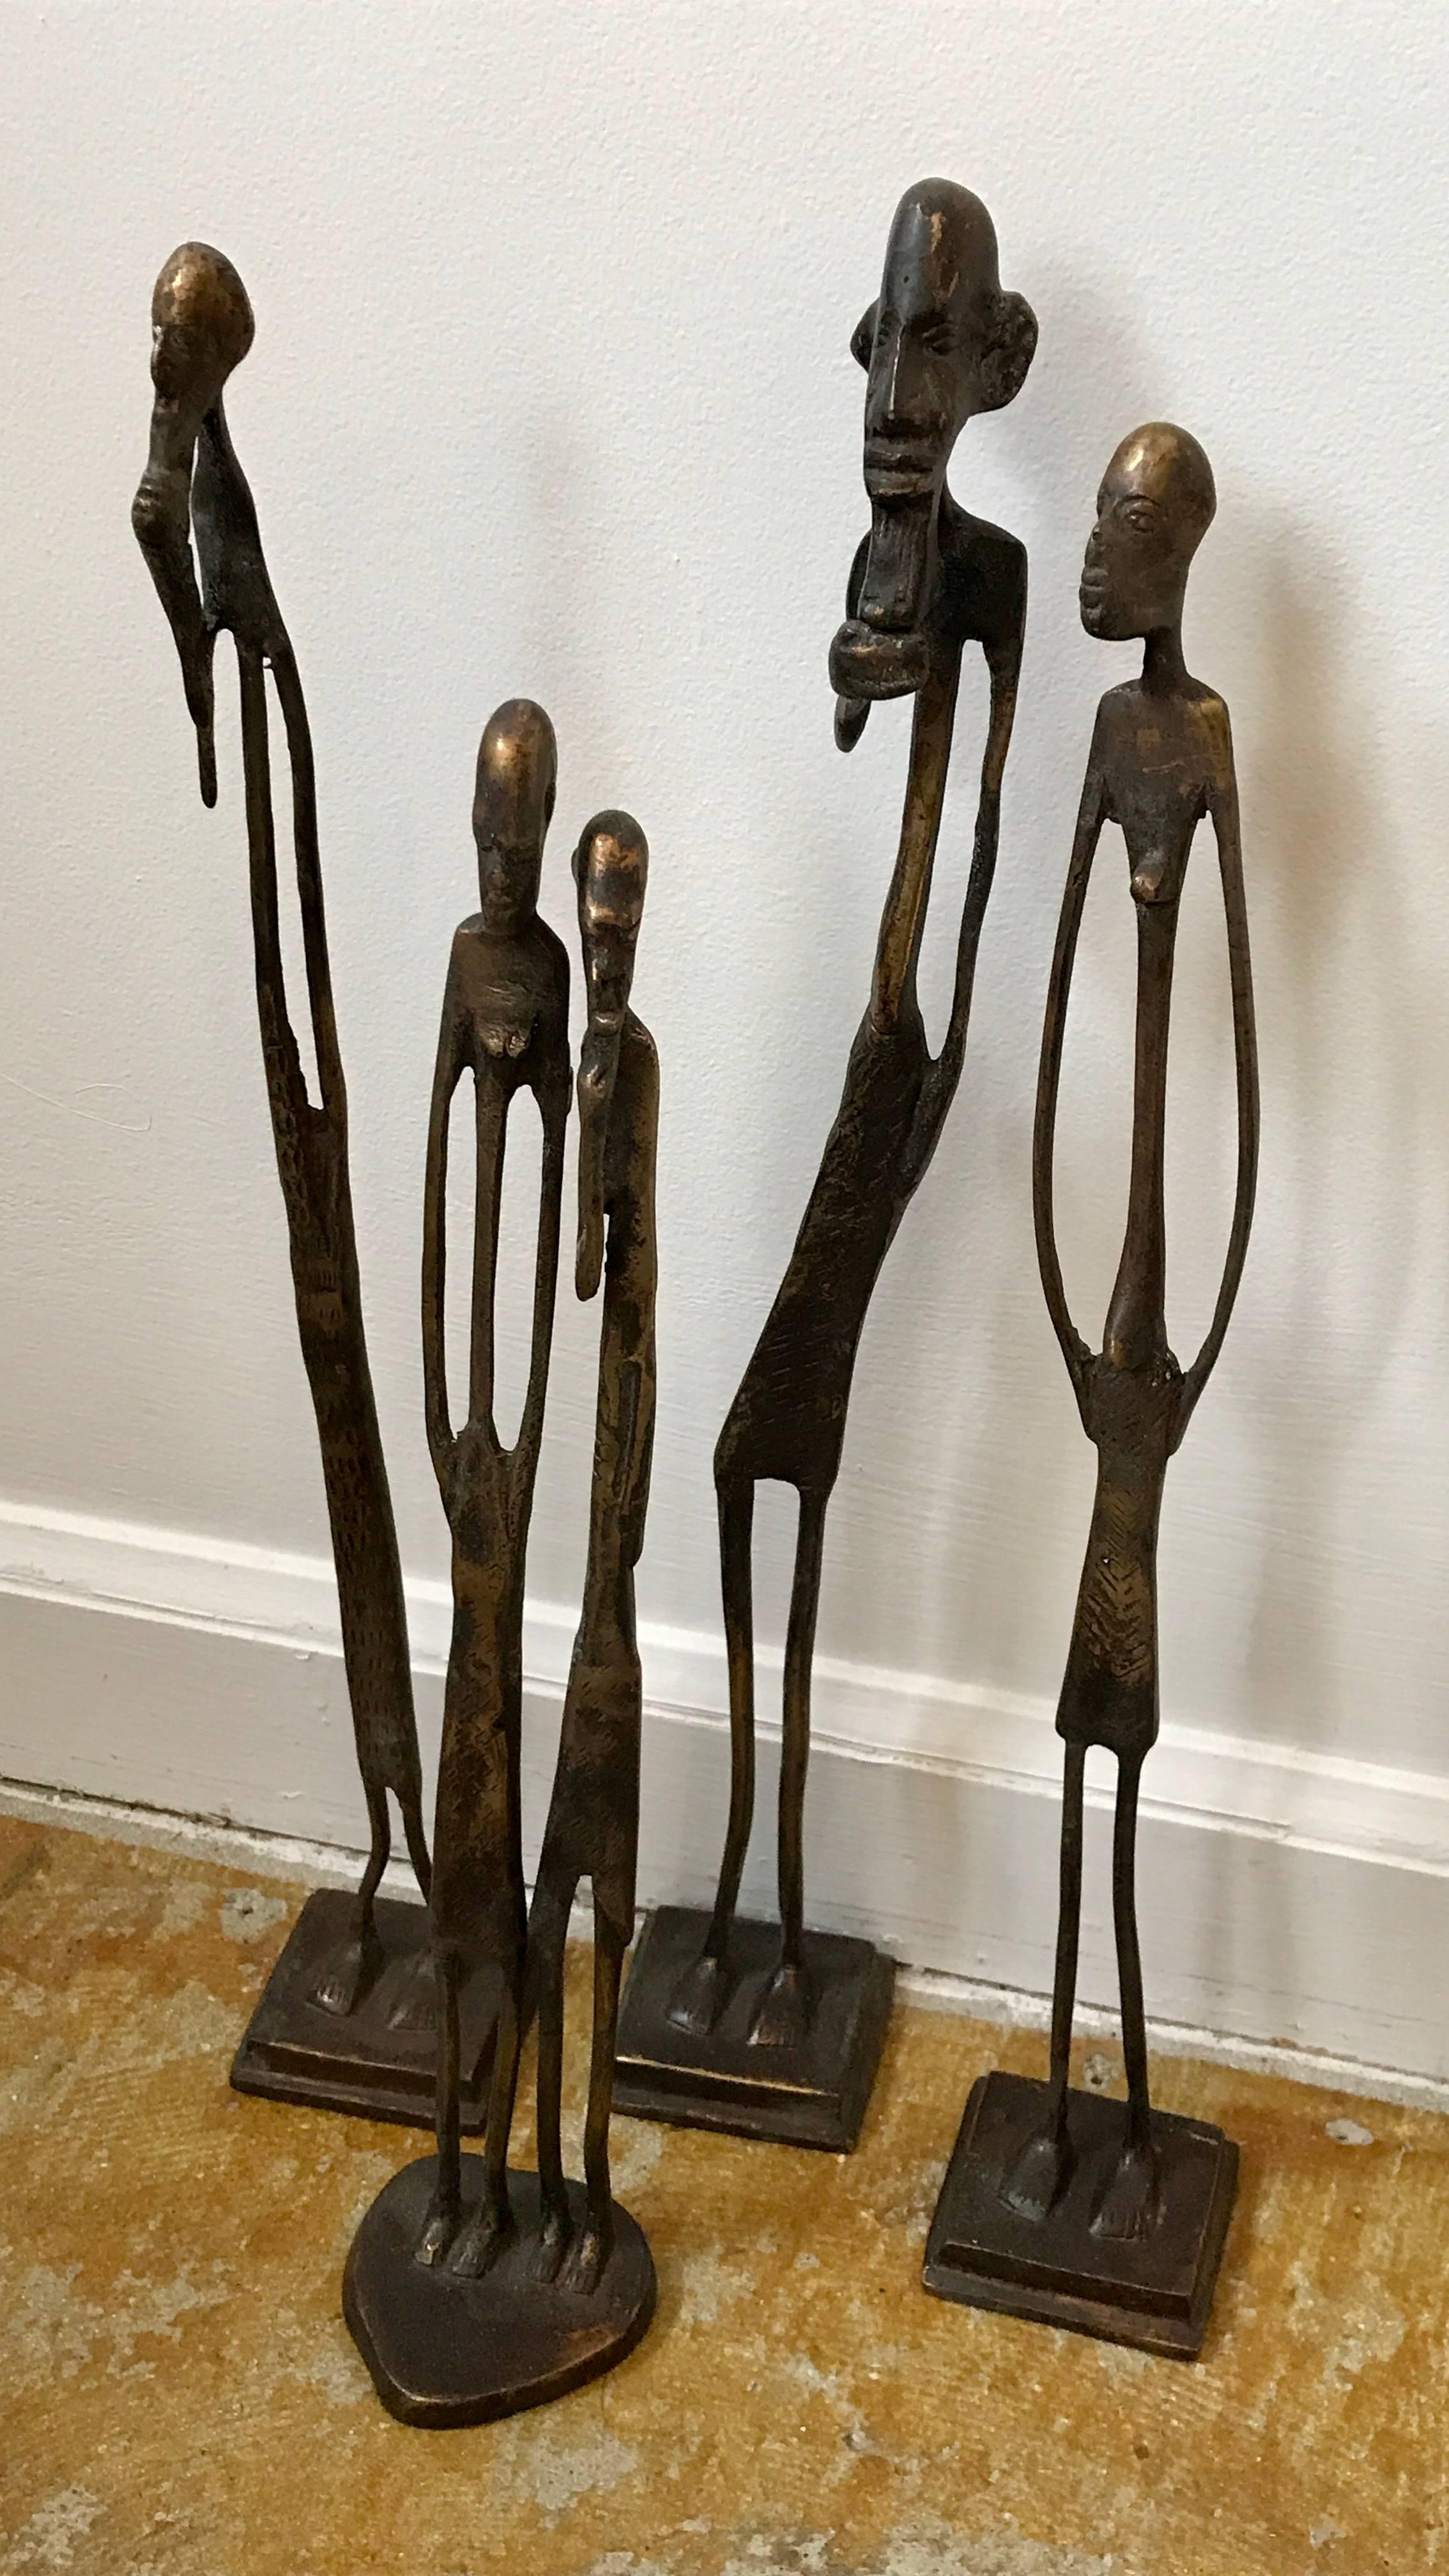 Very cool grouping of four abstract figural sculptures in the style of Giocometti, cast in bronze.